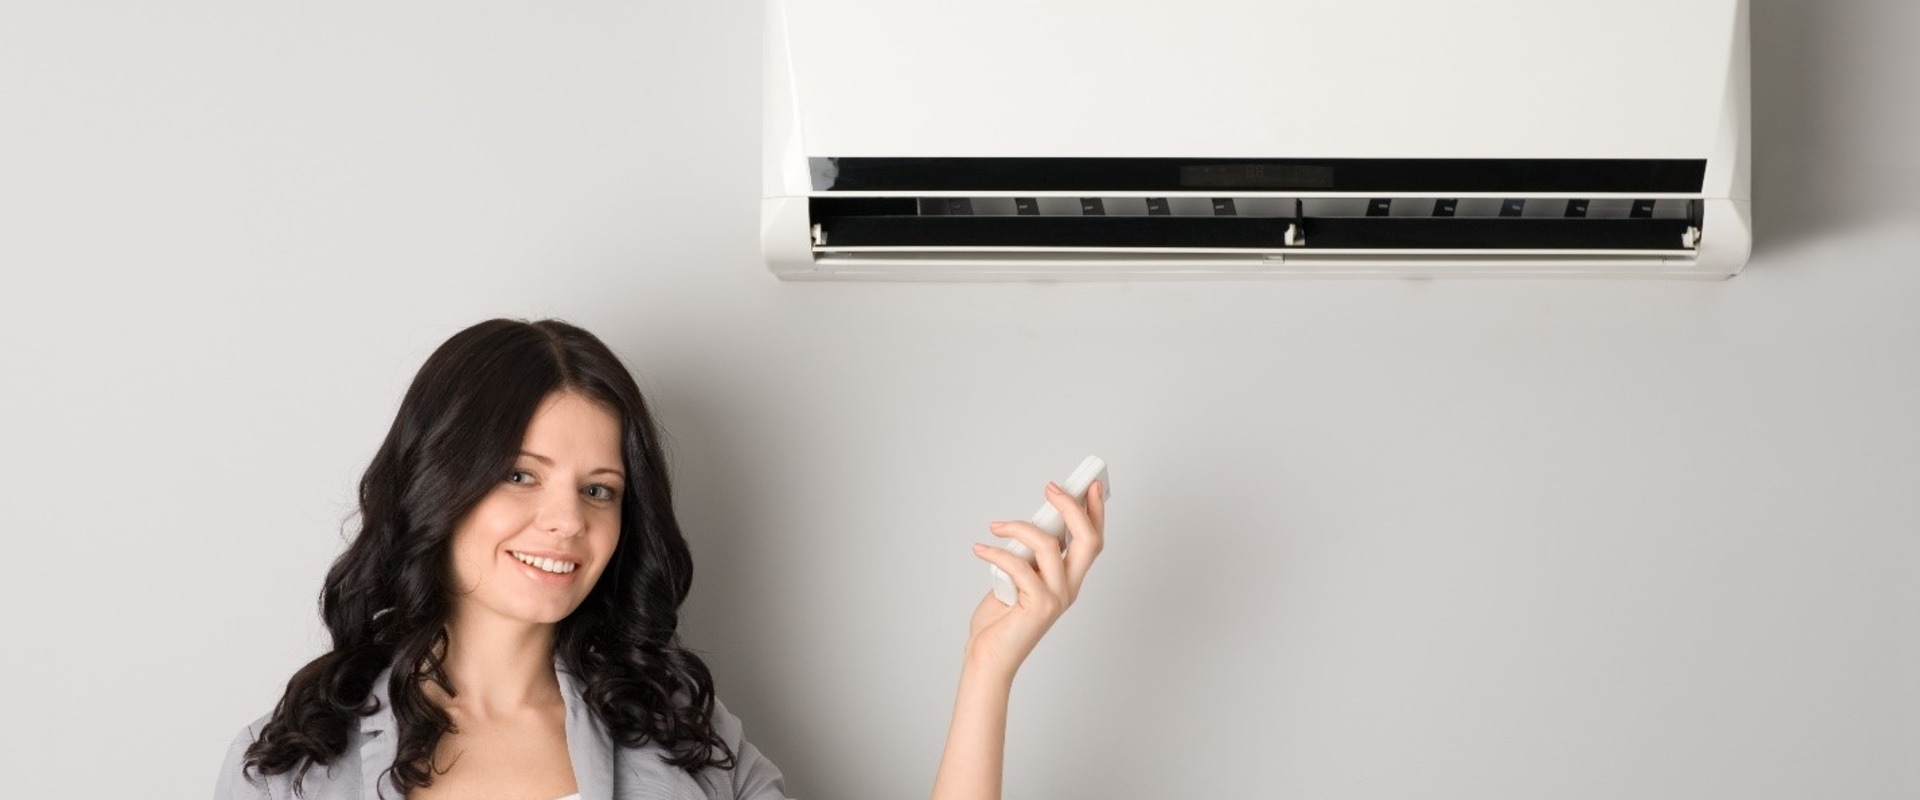 How to use ductless air conditioner?